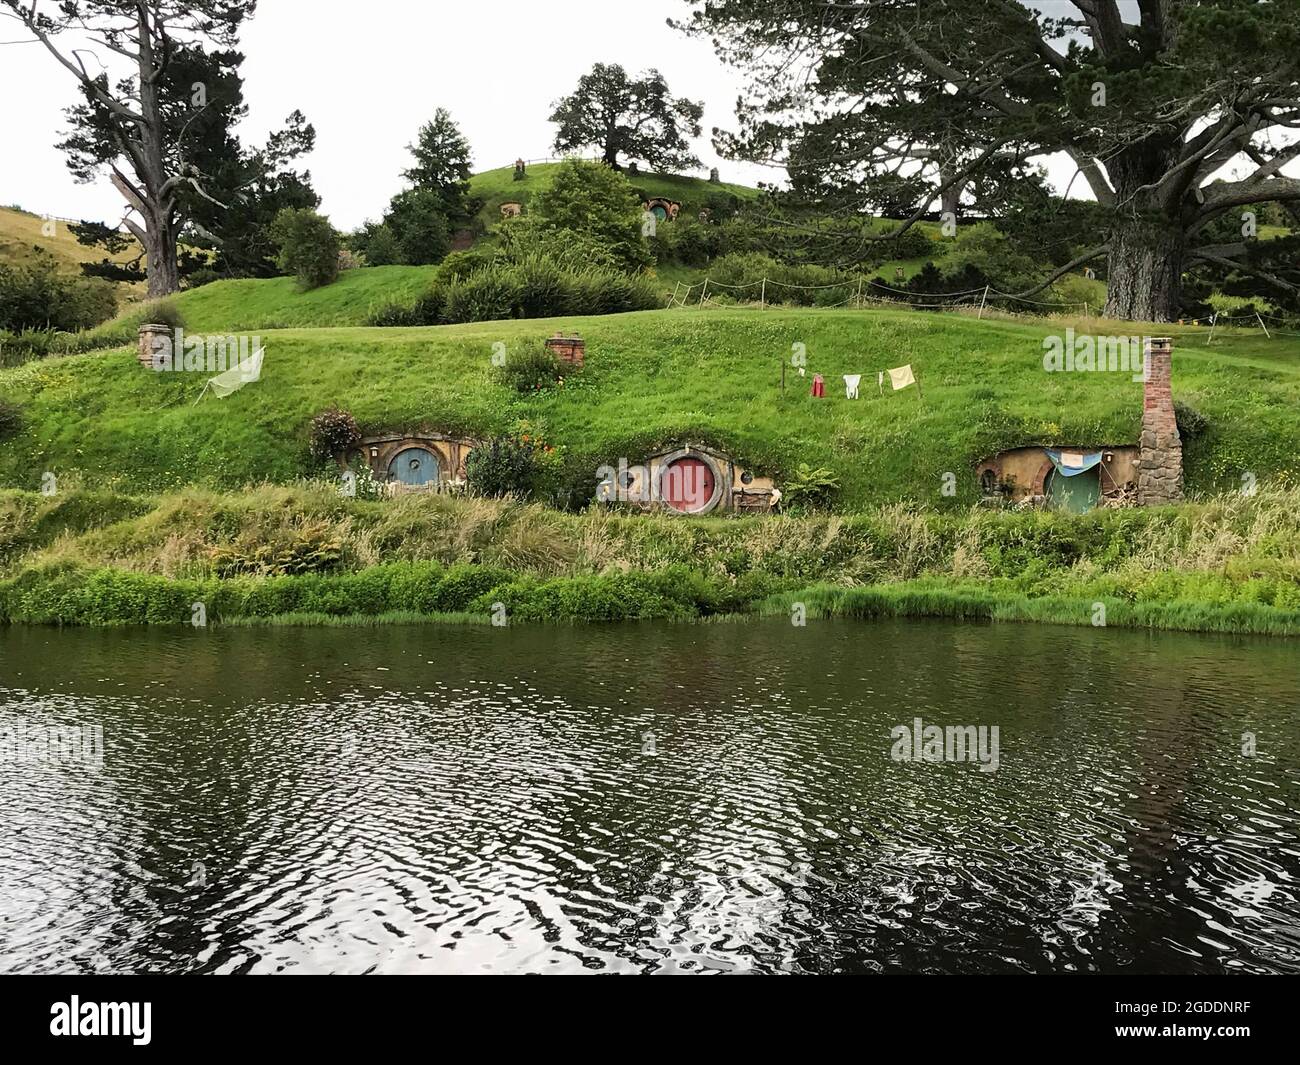 The Hobbiton Movie Set, a location for The Lord of the Rings and The Hobbit film trilogy, is pictured in Matamata, New Zealand, December 27, 2020. Picture taken December 27, 2020.  REUTERS/Praveen Menon Stock Photo